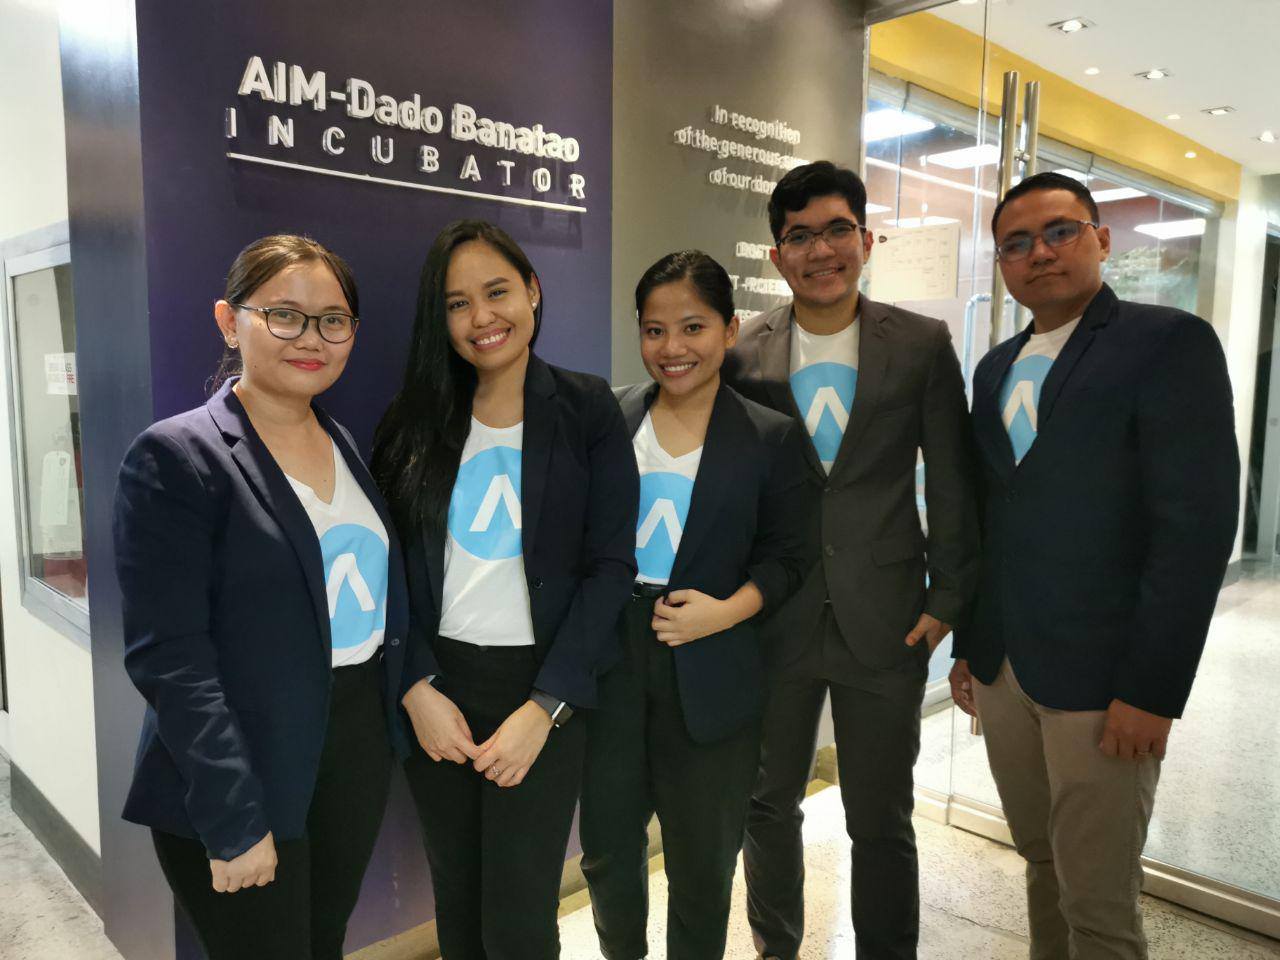 THE AI4GOV TEAM. Lei Motilla (second from left) with her team.